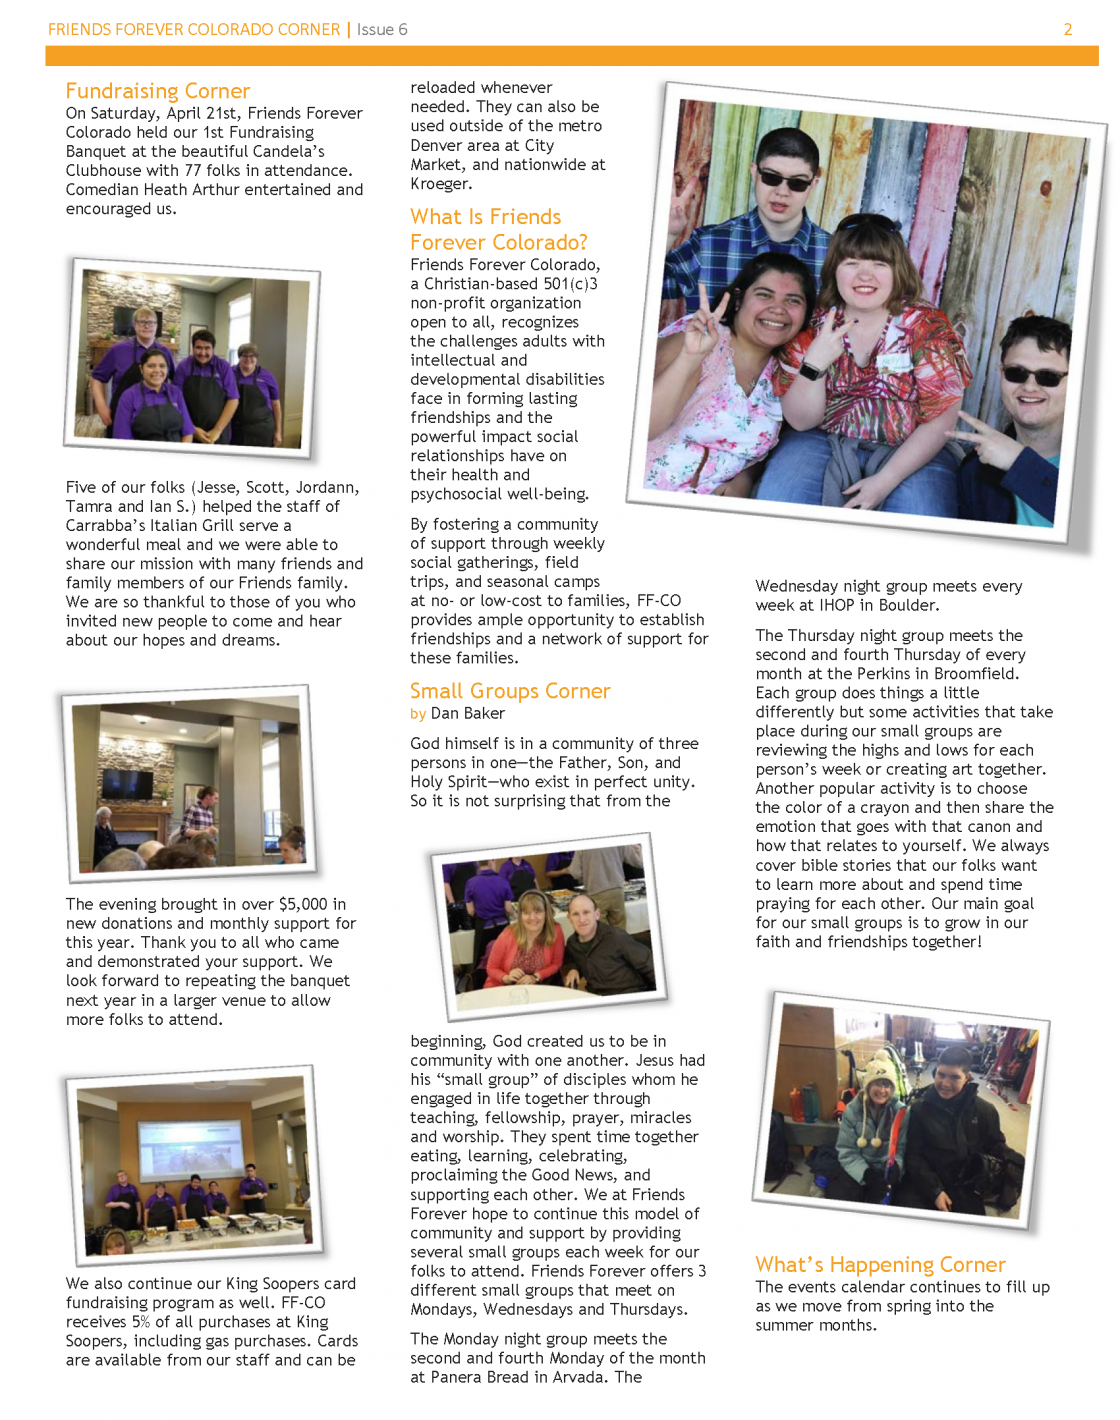 Newsletter Issue 6 - page 2